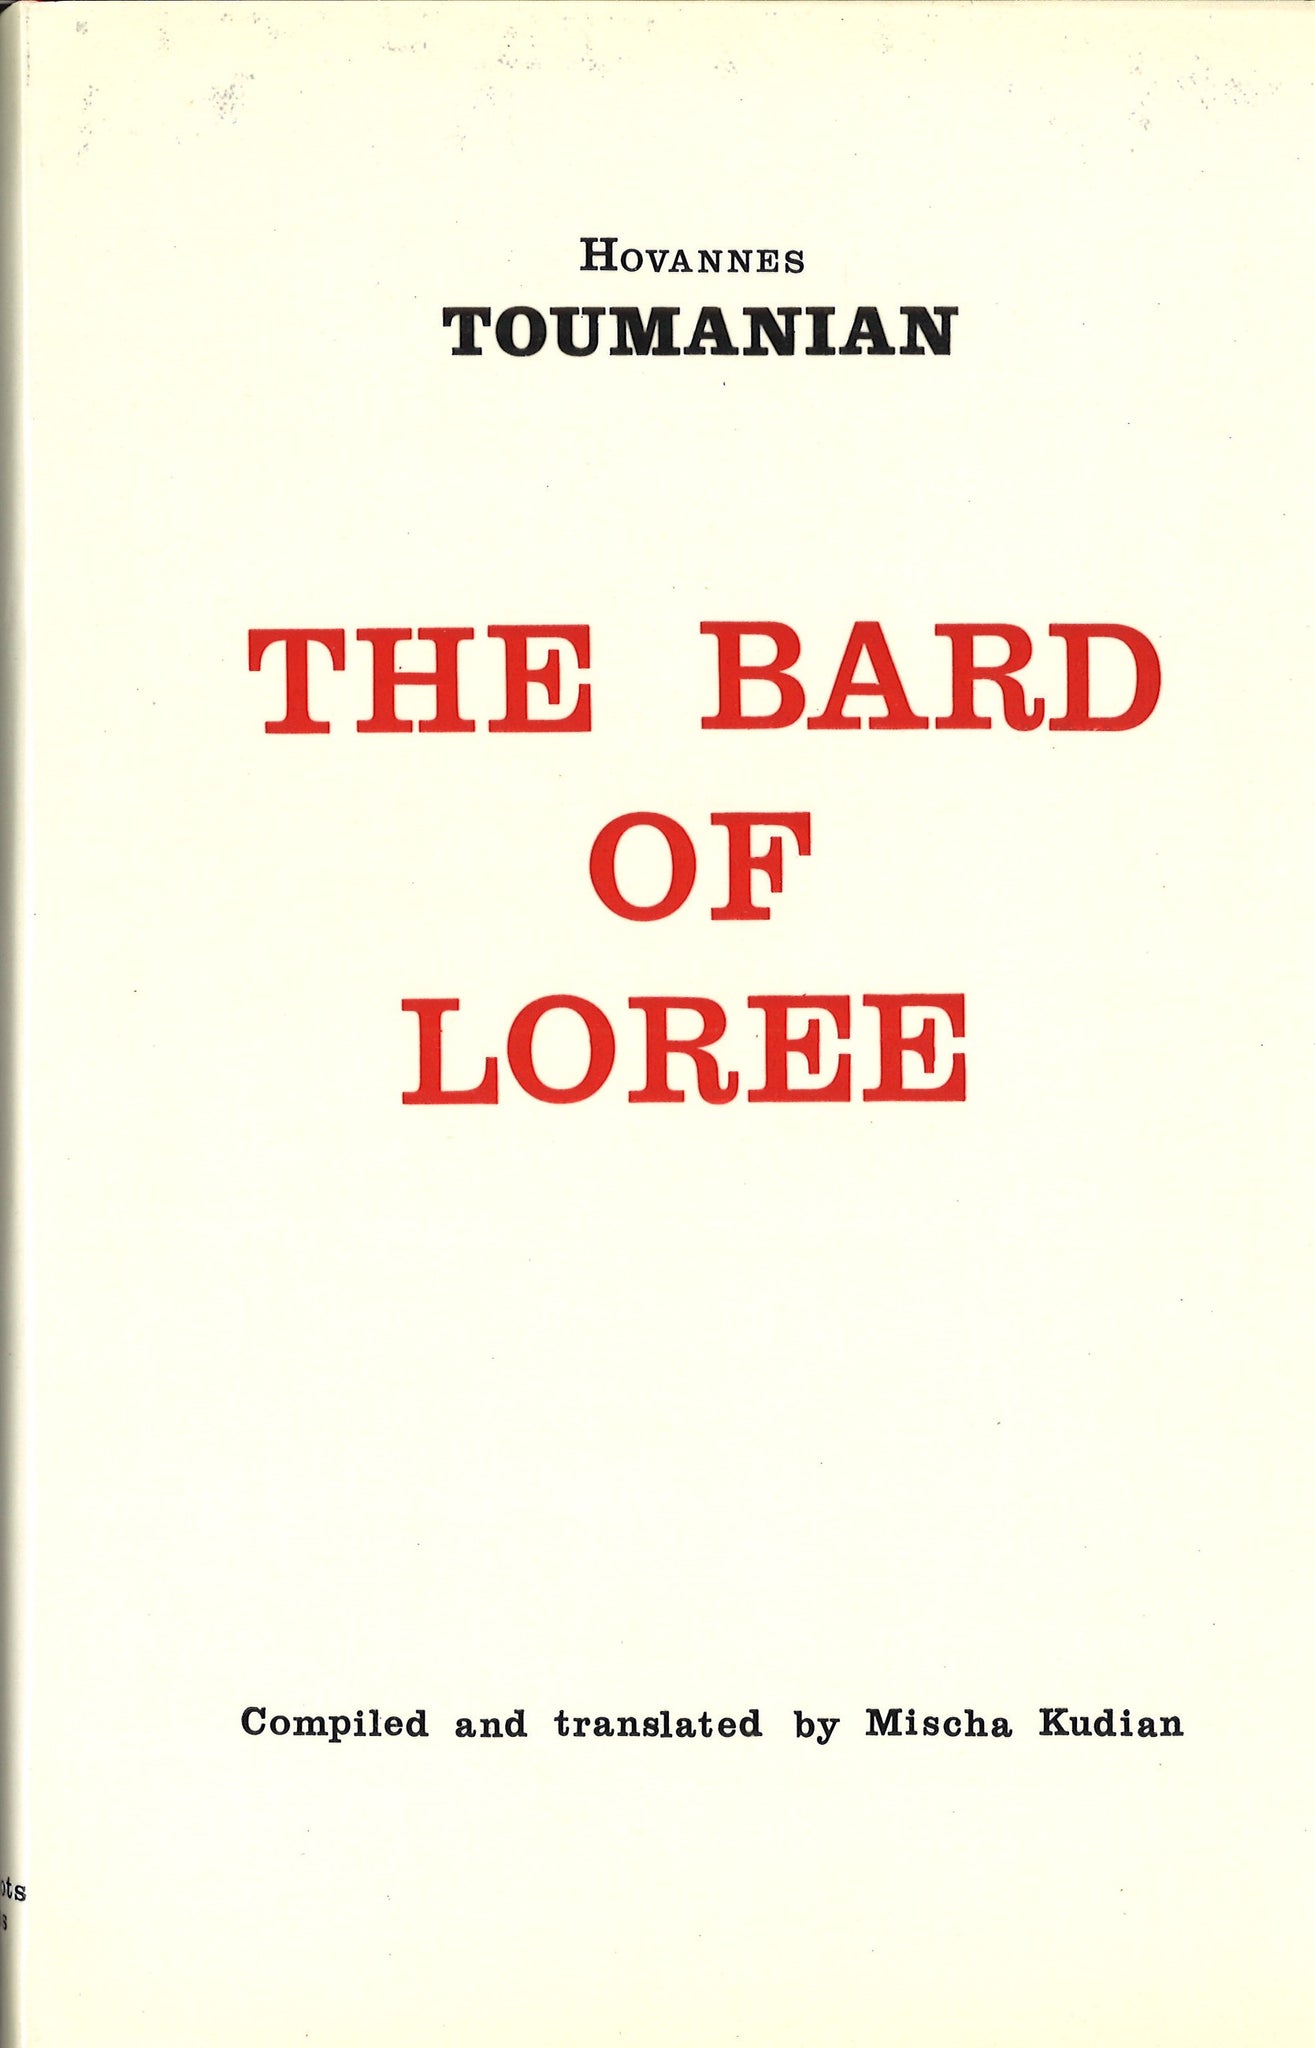 BARD OF LOREE: Selected Works of Hovannes Toumanian